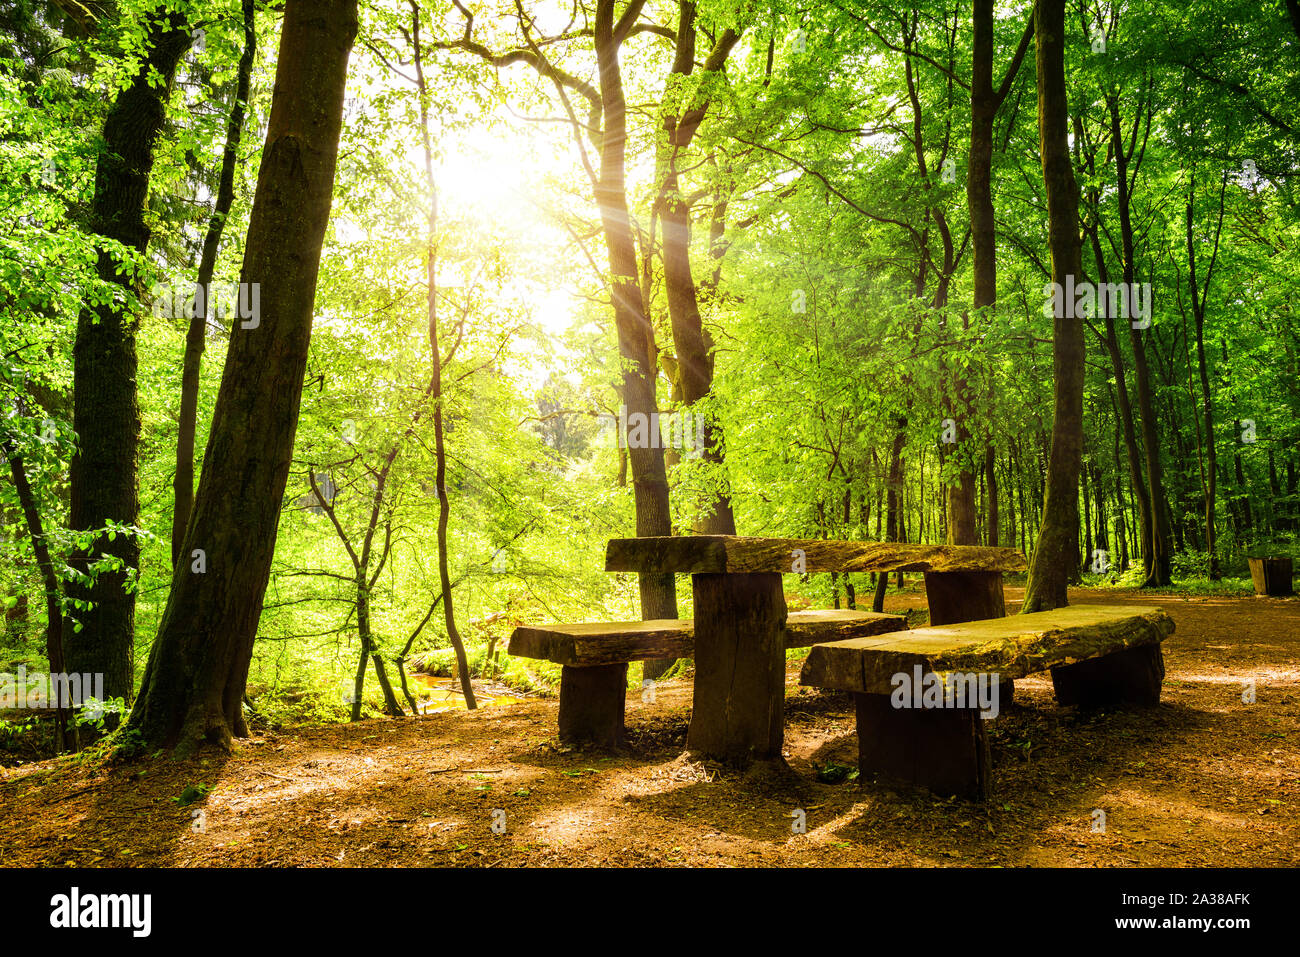 Forest in summer with benches, table and sun shining through the trees Stock Photo